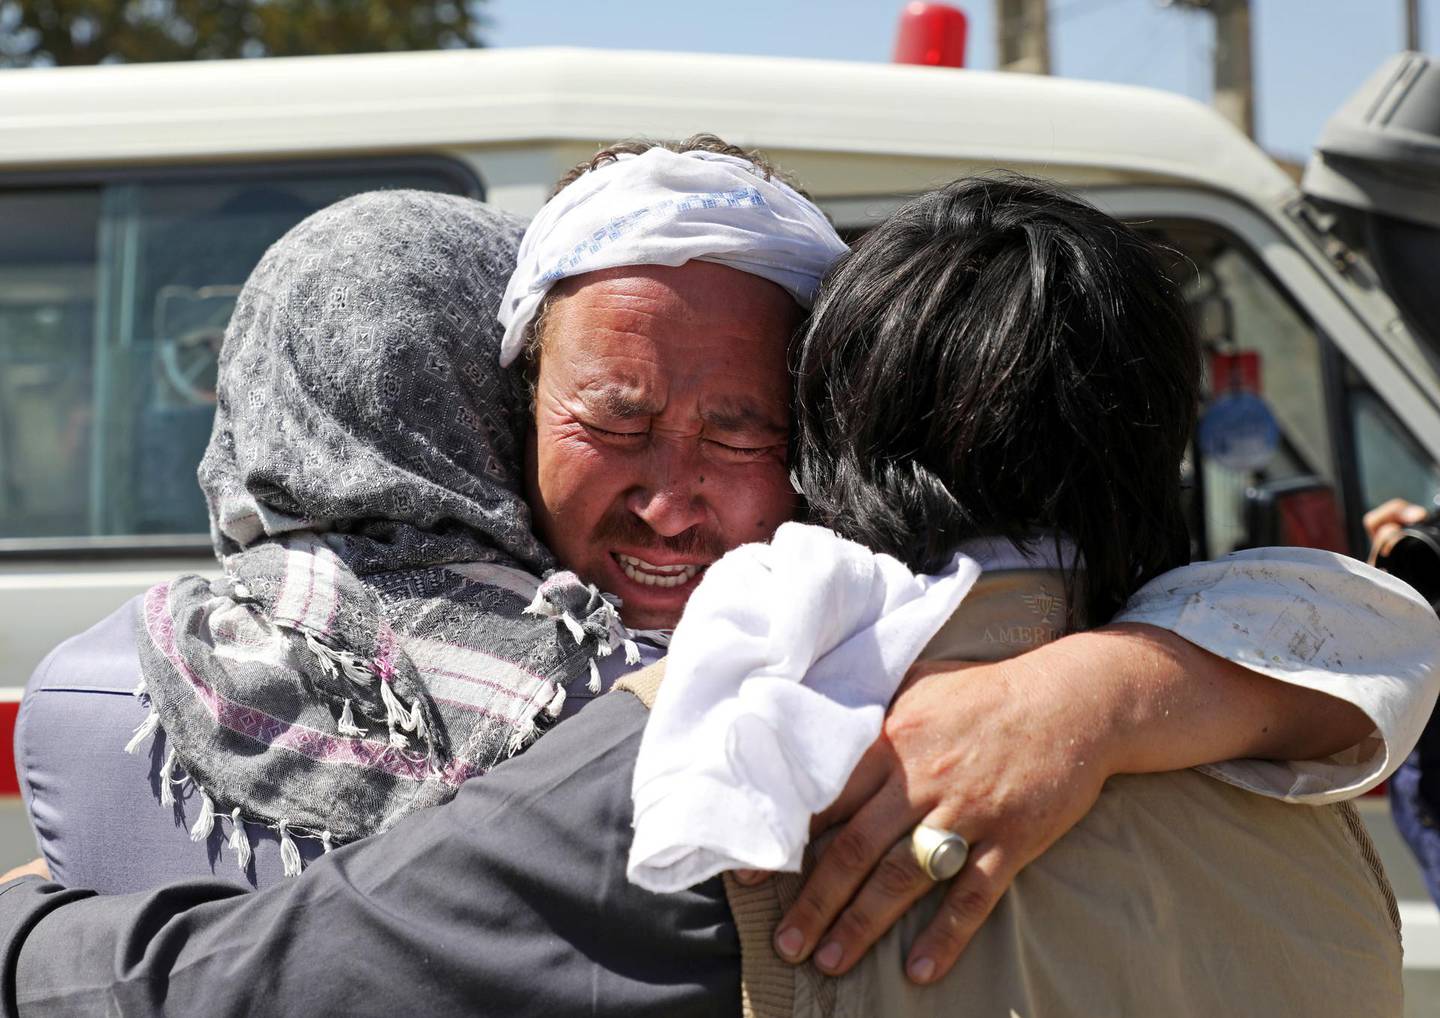 Afghan men hug each other as they mourn during the funeral of their relatives after a wedding suicide bomb blast in Kabul, Afghanistan August 18, 2019. REUTERS/Omar Sobhani